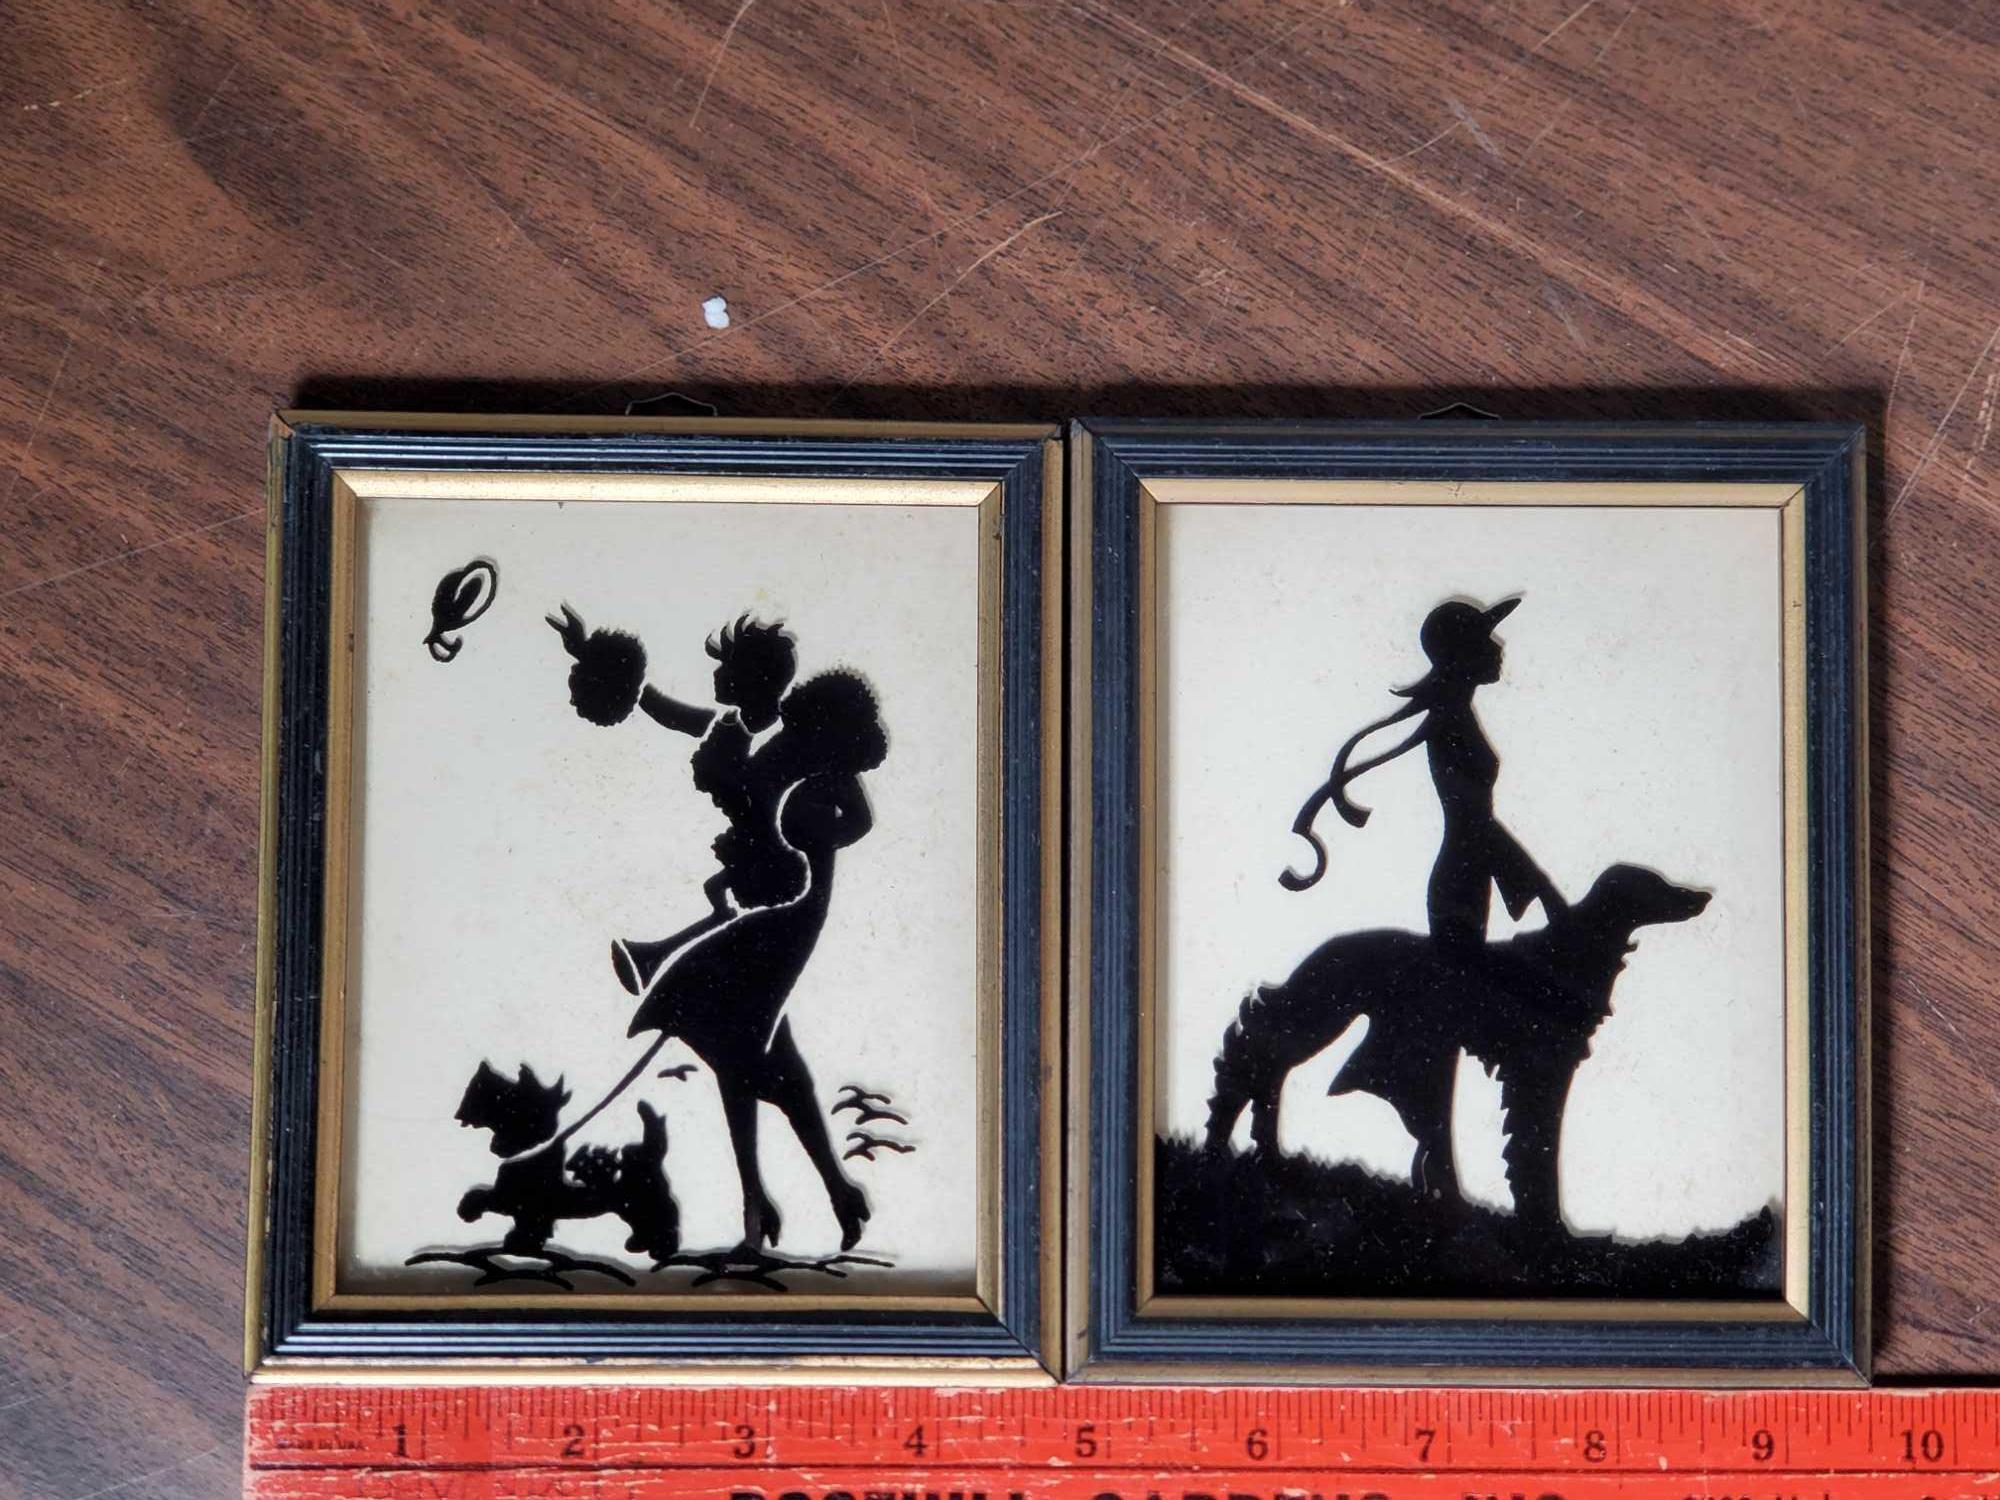 Tray Lot of Silhouettes and Trinket Boxes